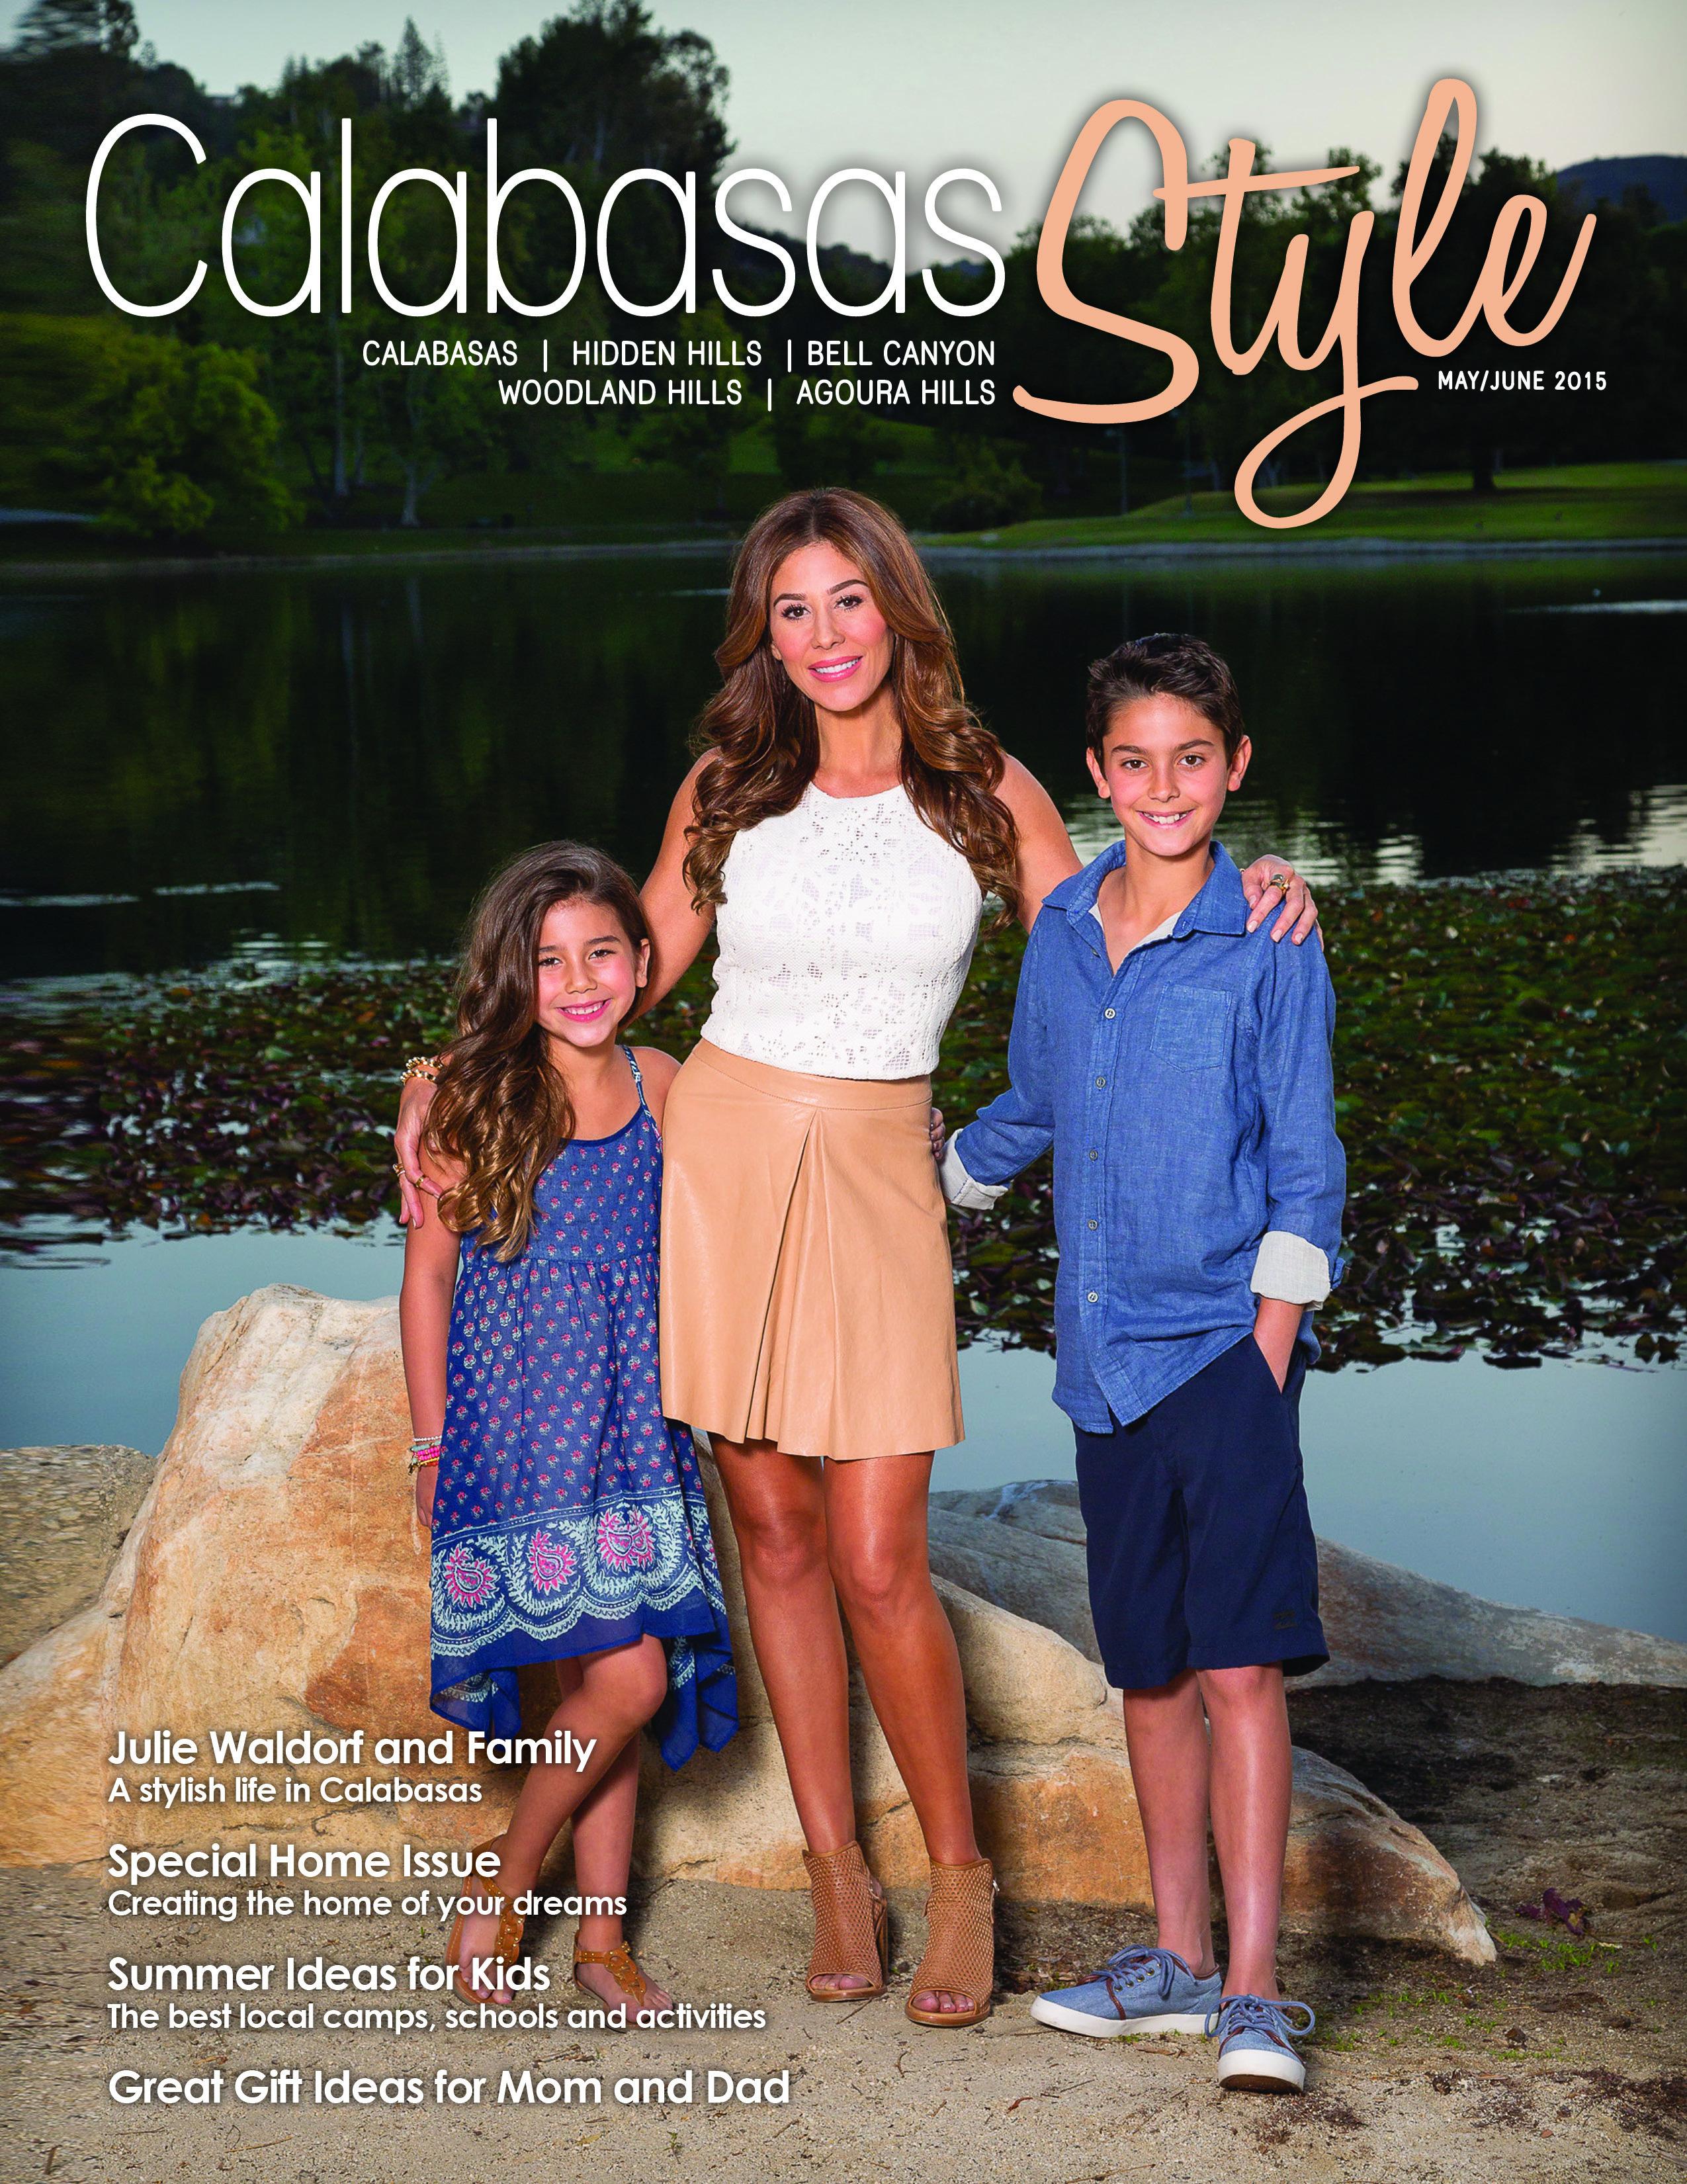 Julie Waldorf on X: Lot's of fun for my kids and I being on the cover and sharing  our story with Calabasas Style Magazine May/June issue.   / X